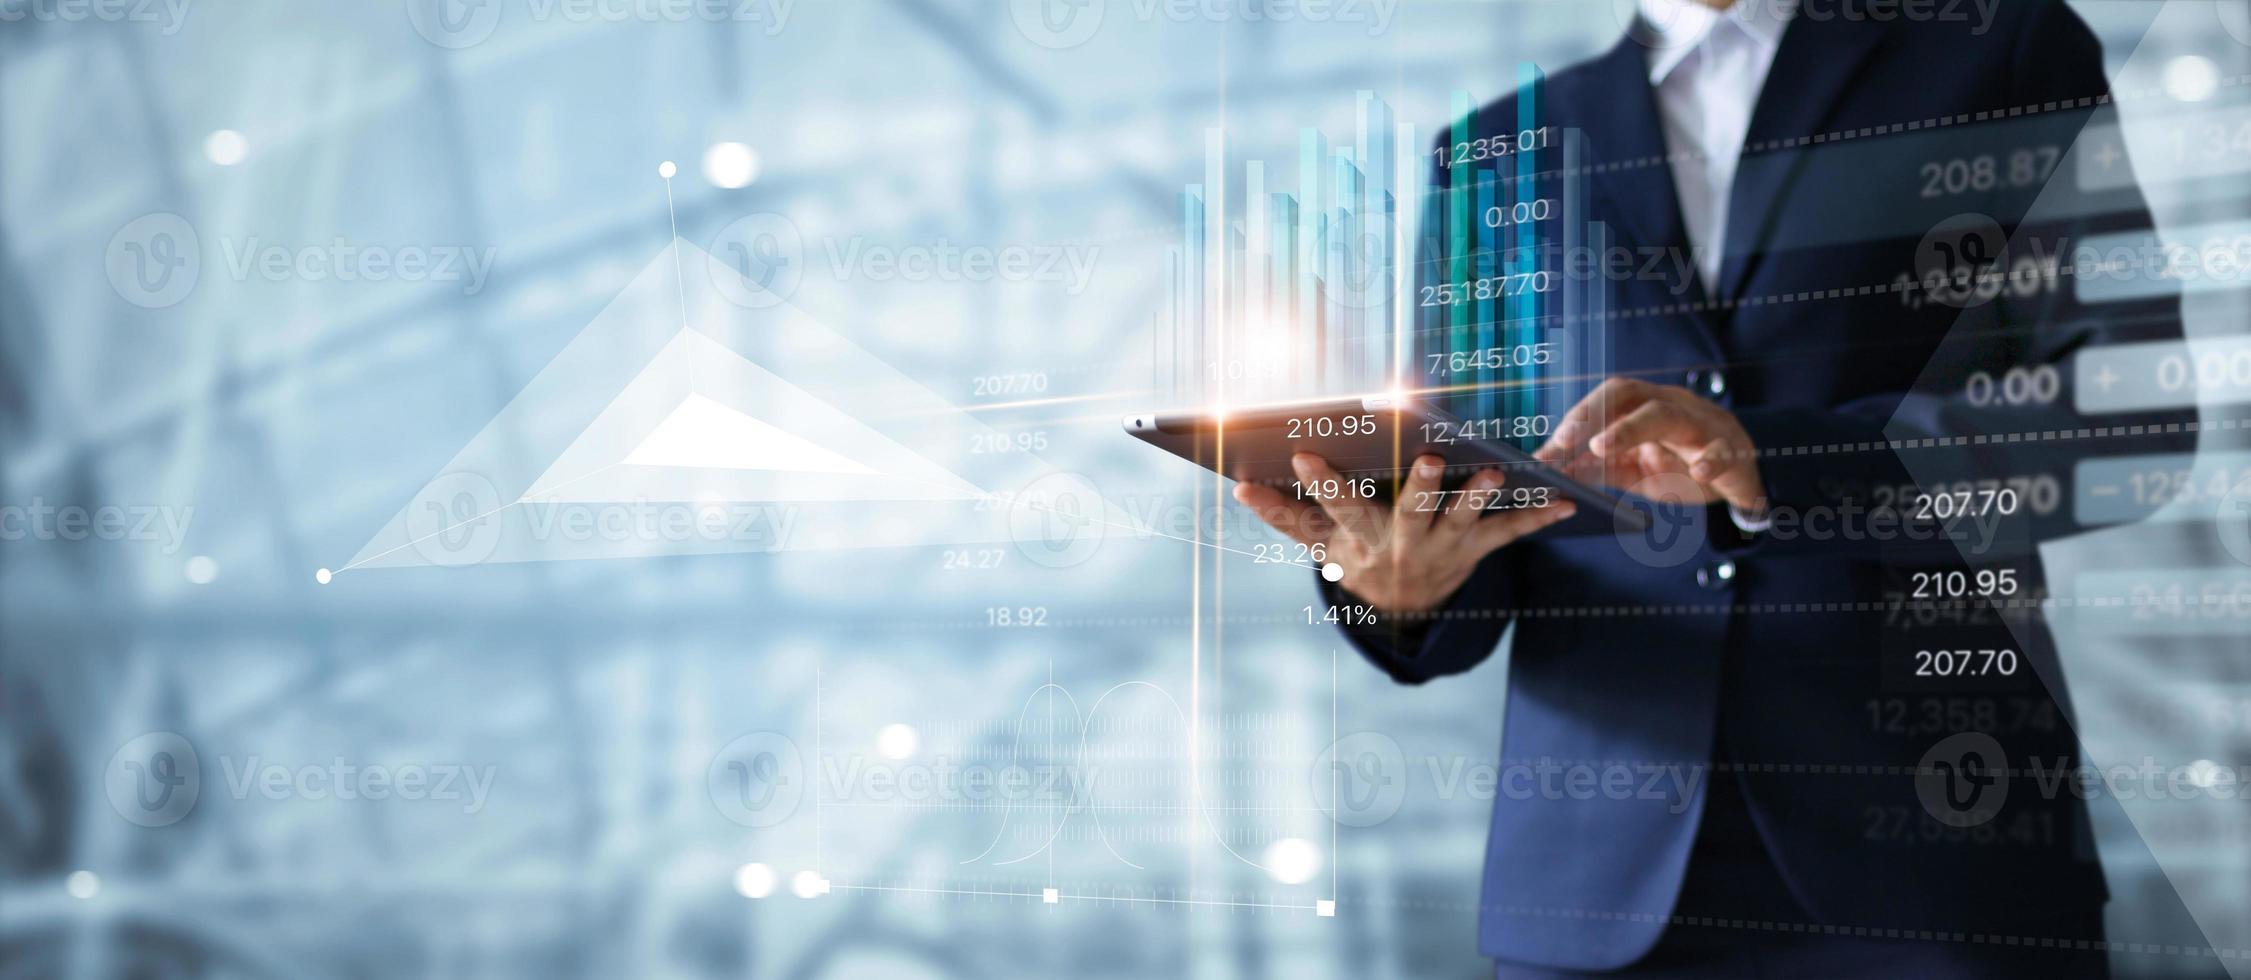 Businessman using tablet analyzing sales data and economic growth graph chart.  Business strategy. Abstract icon. Digital marketing photo